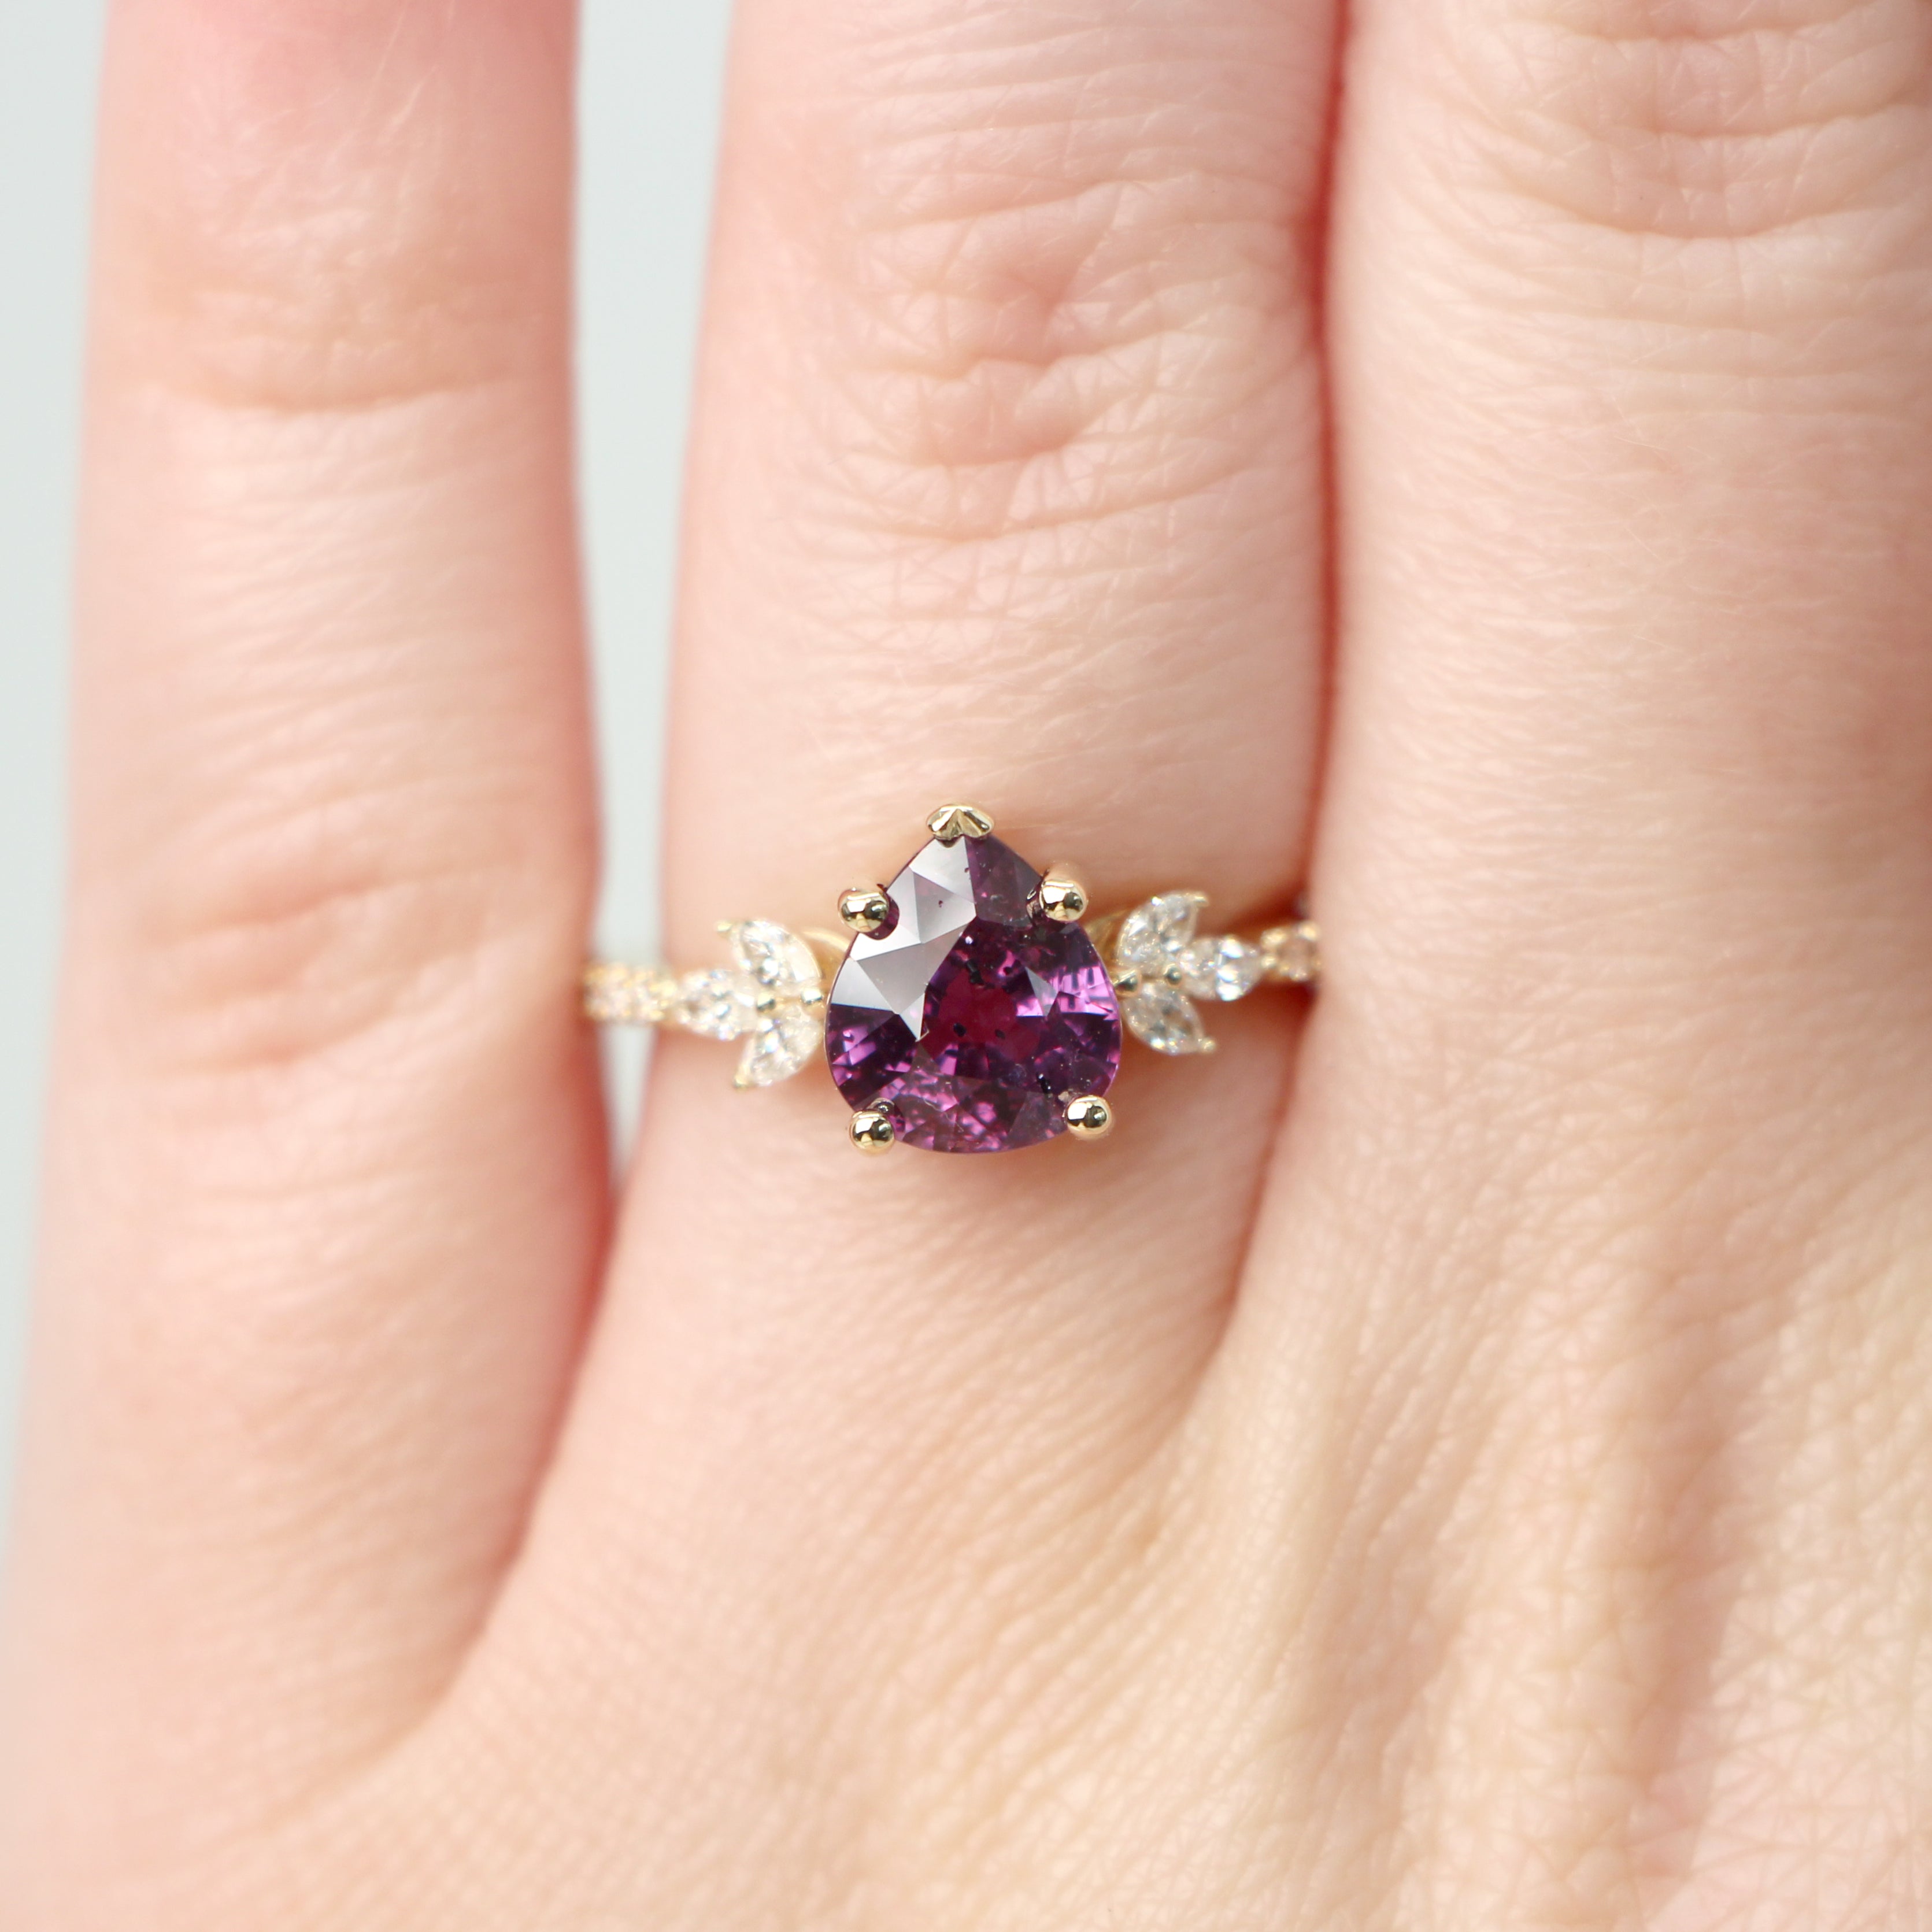 Betty Ring with a 2.55 Carat Pear Magenta Pink Sapphire and White Accent Diamonds - Ready to Size and Ship - Midwinter Co. Alternative Bridal Rings and Modern Fine Jewelry